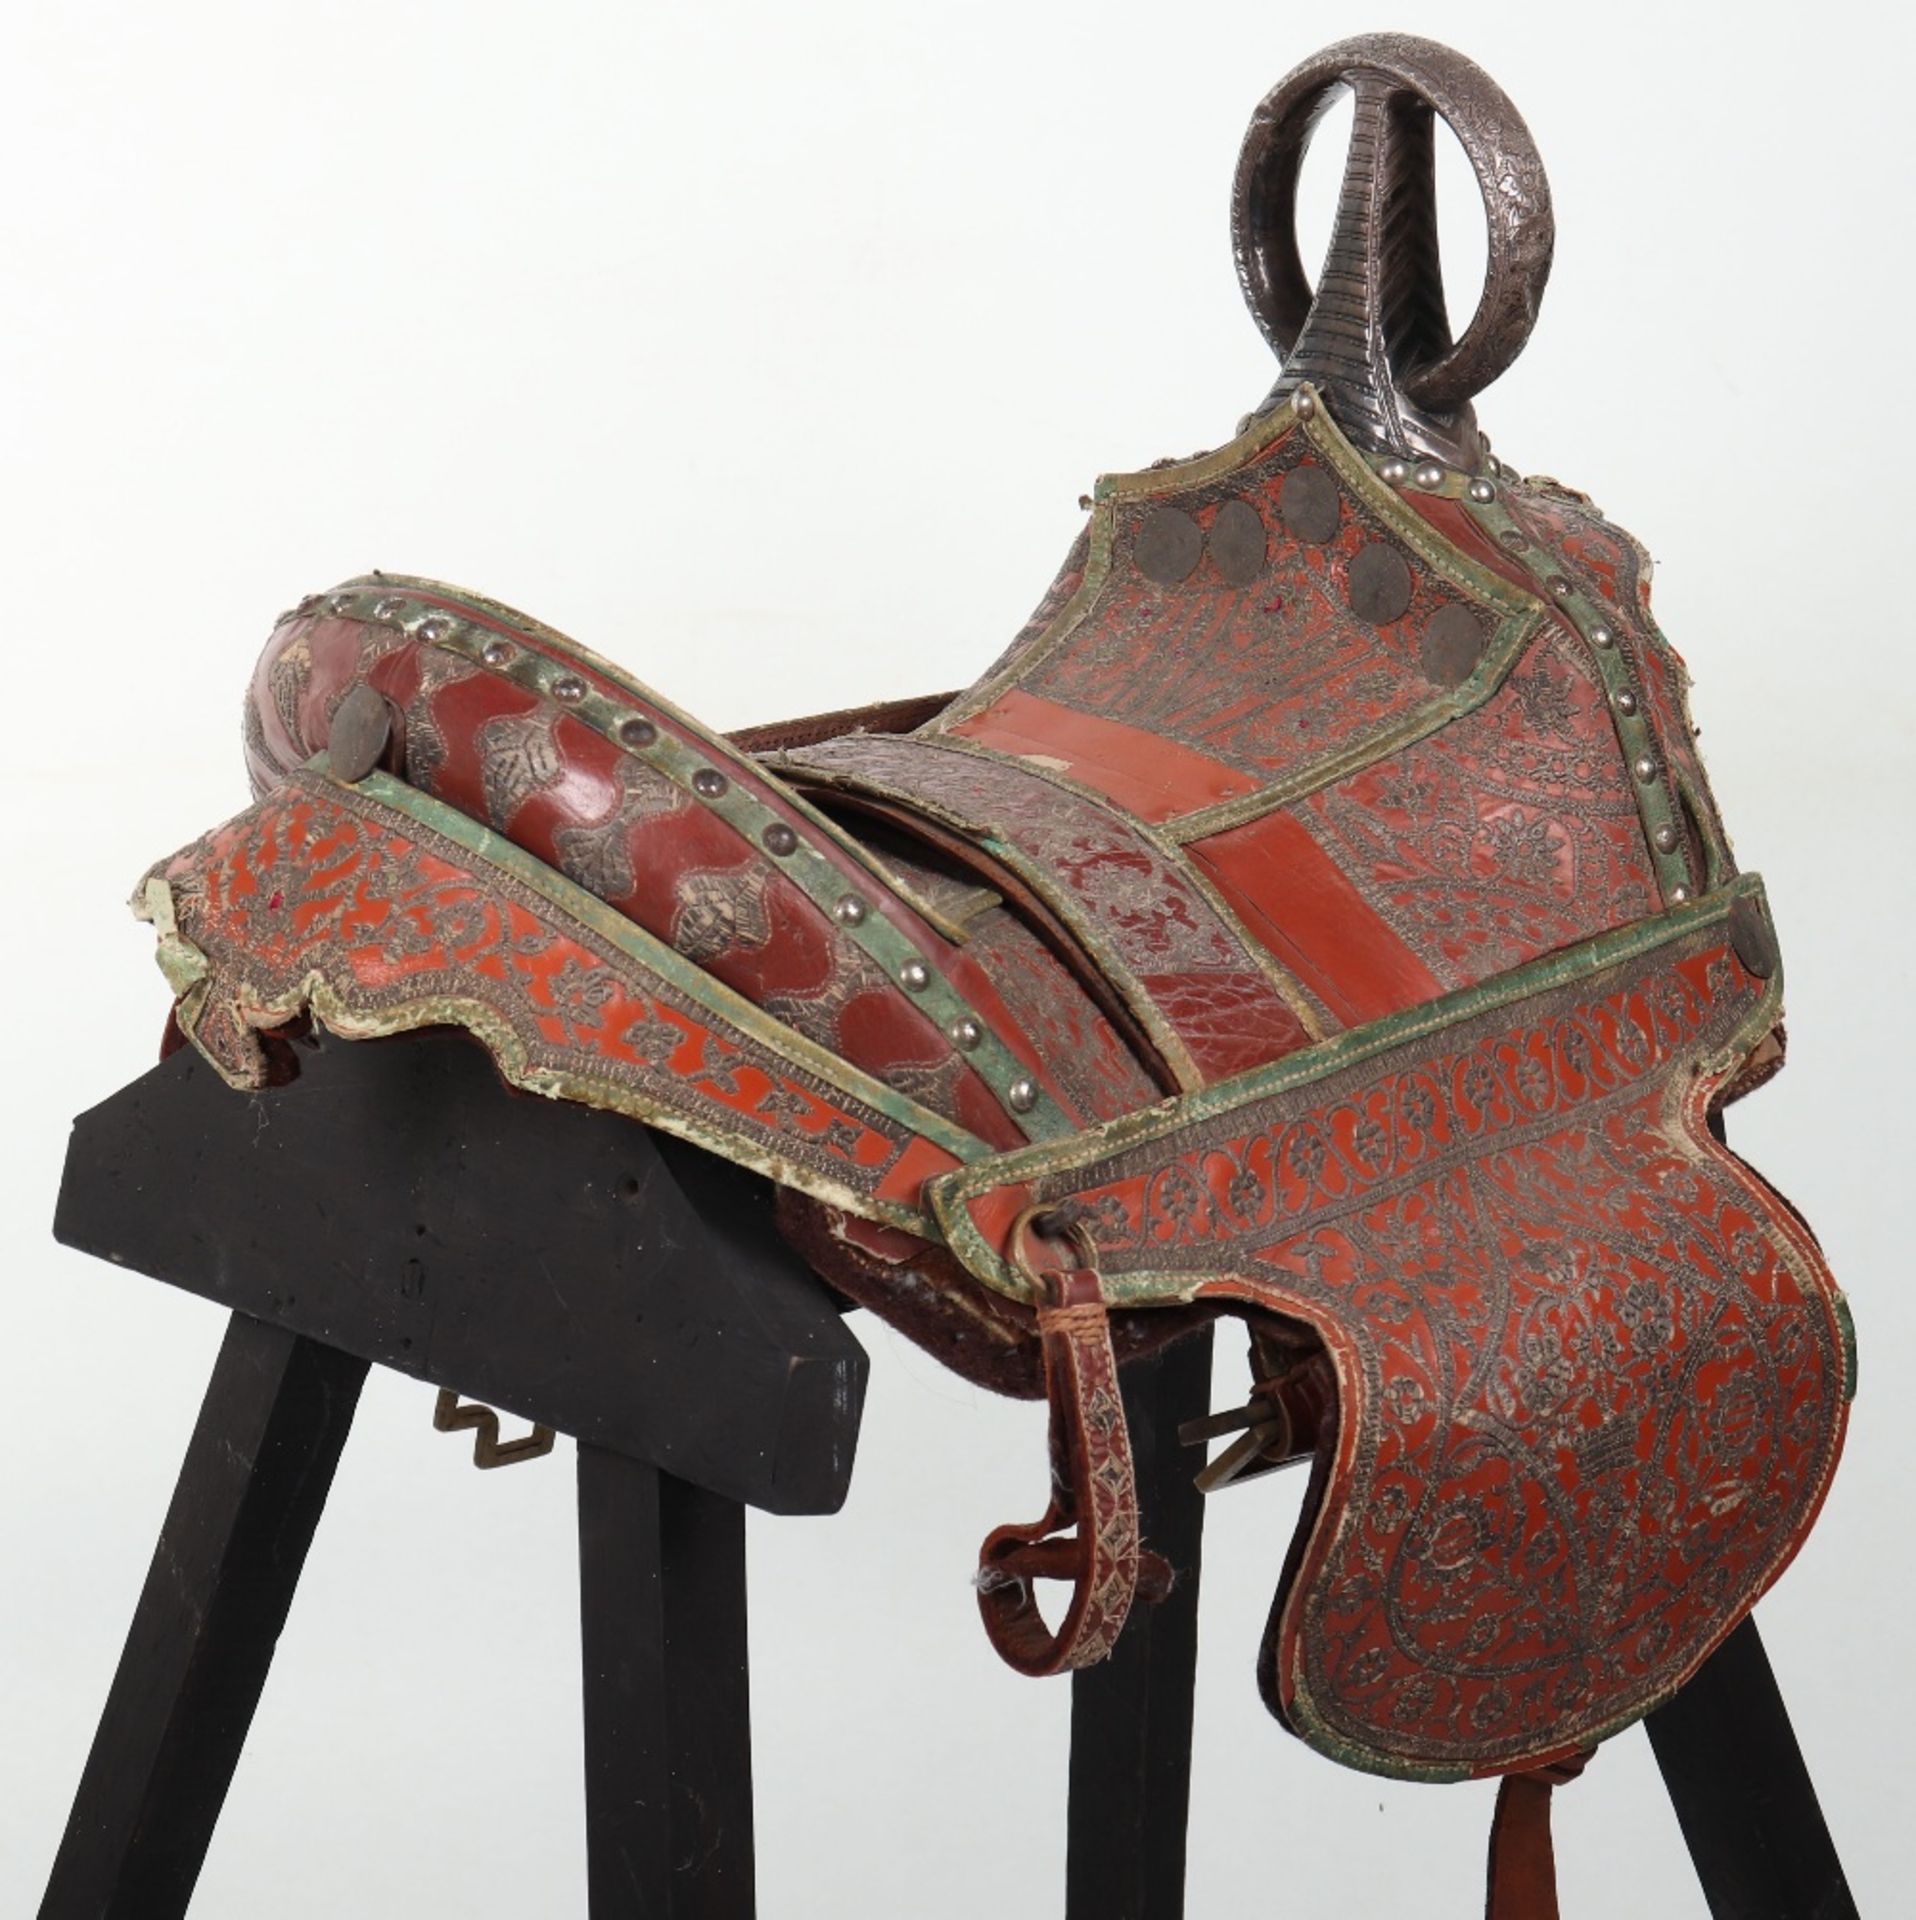 Fine and Scarce North Indian Saddle, Probably Late 19th or Early 20th Century - Image 9 of 12